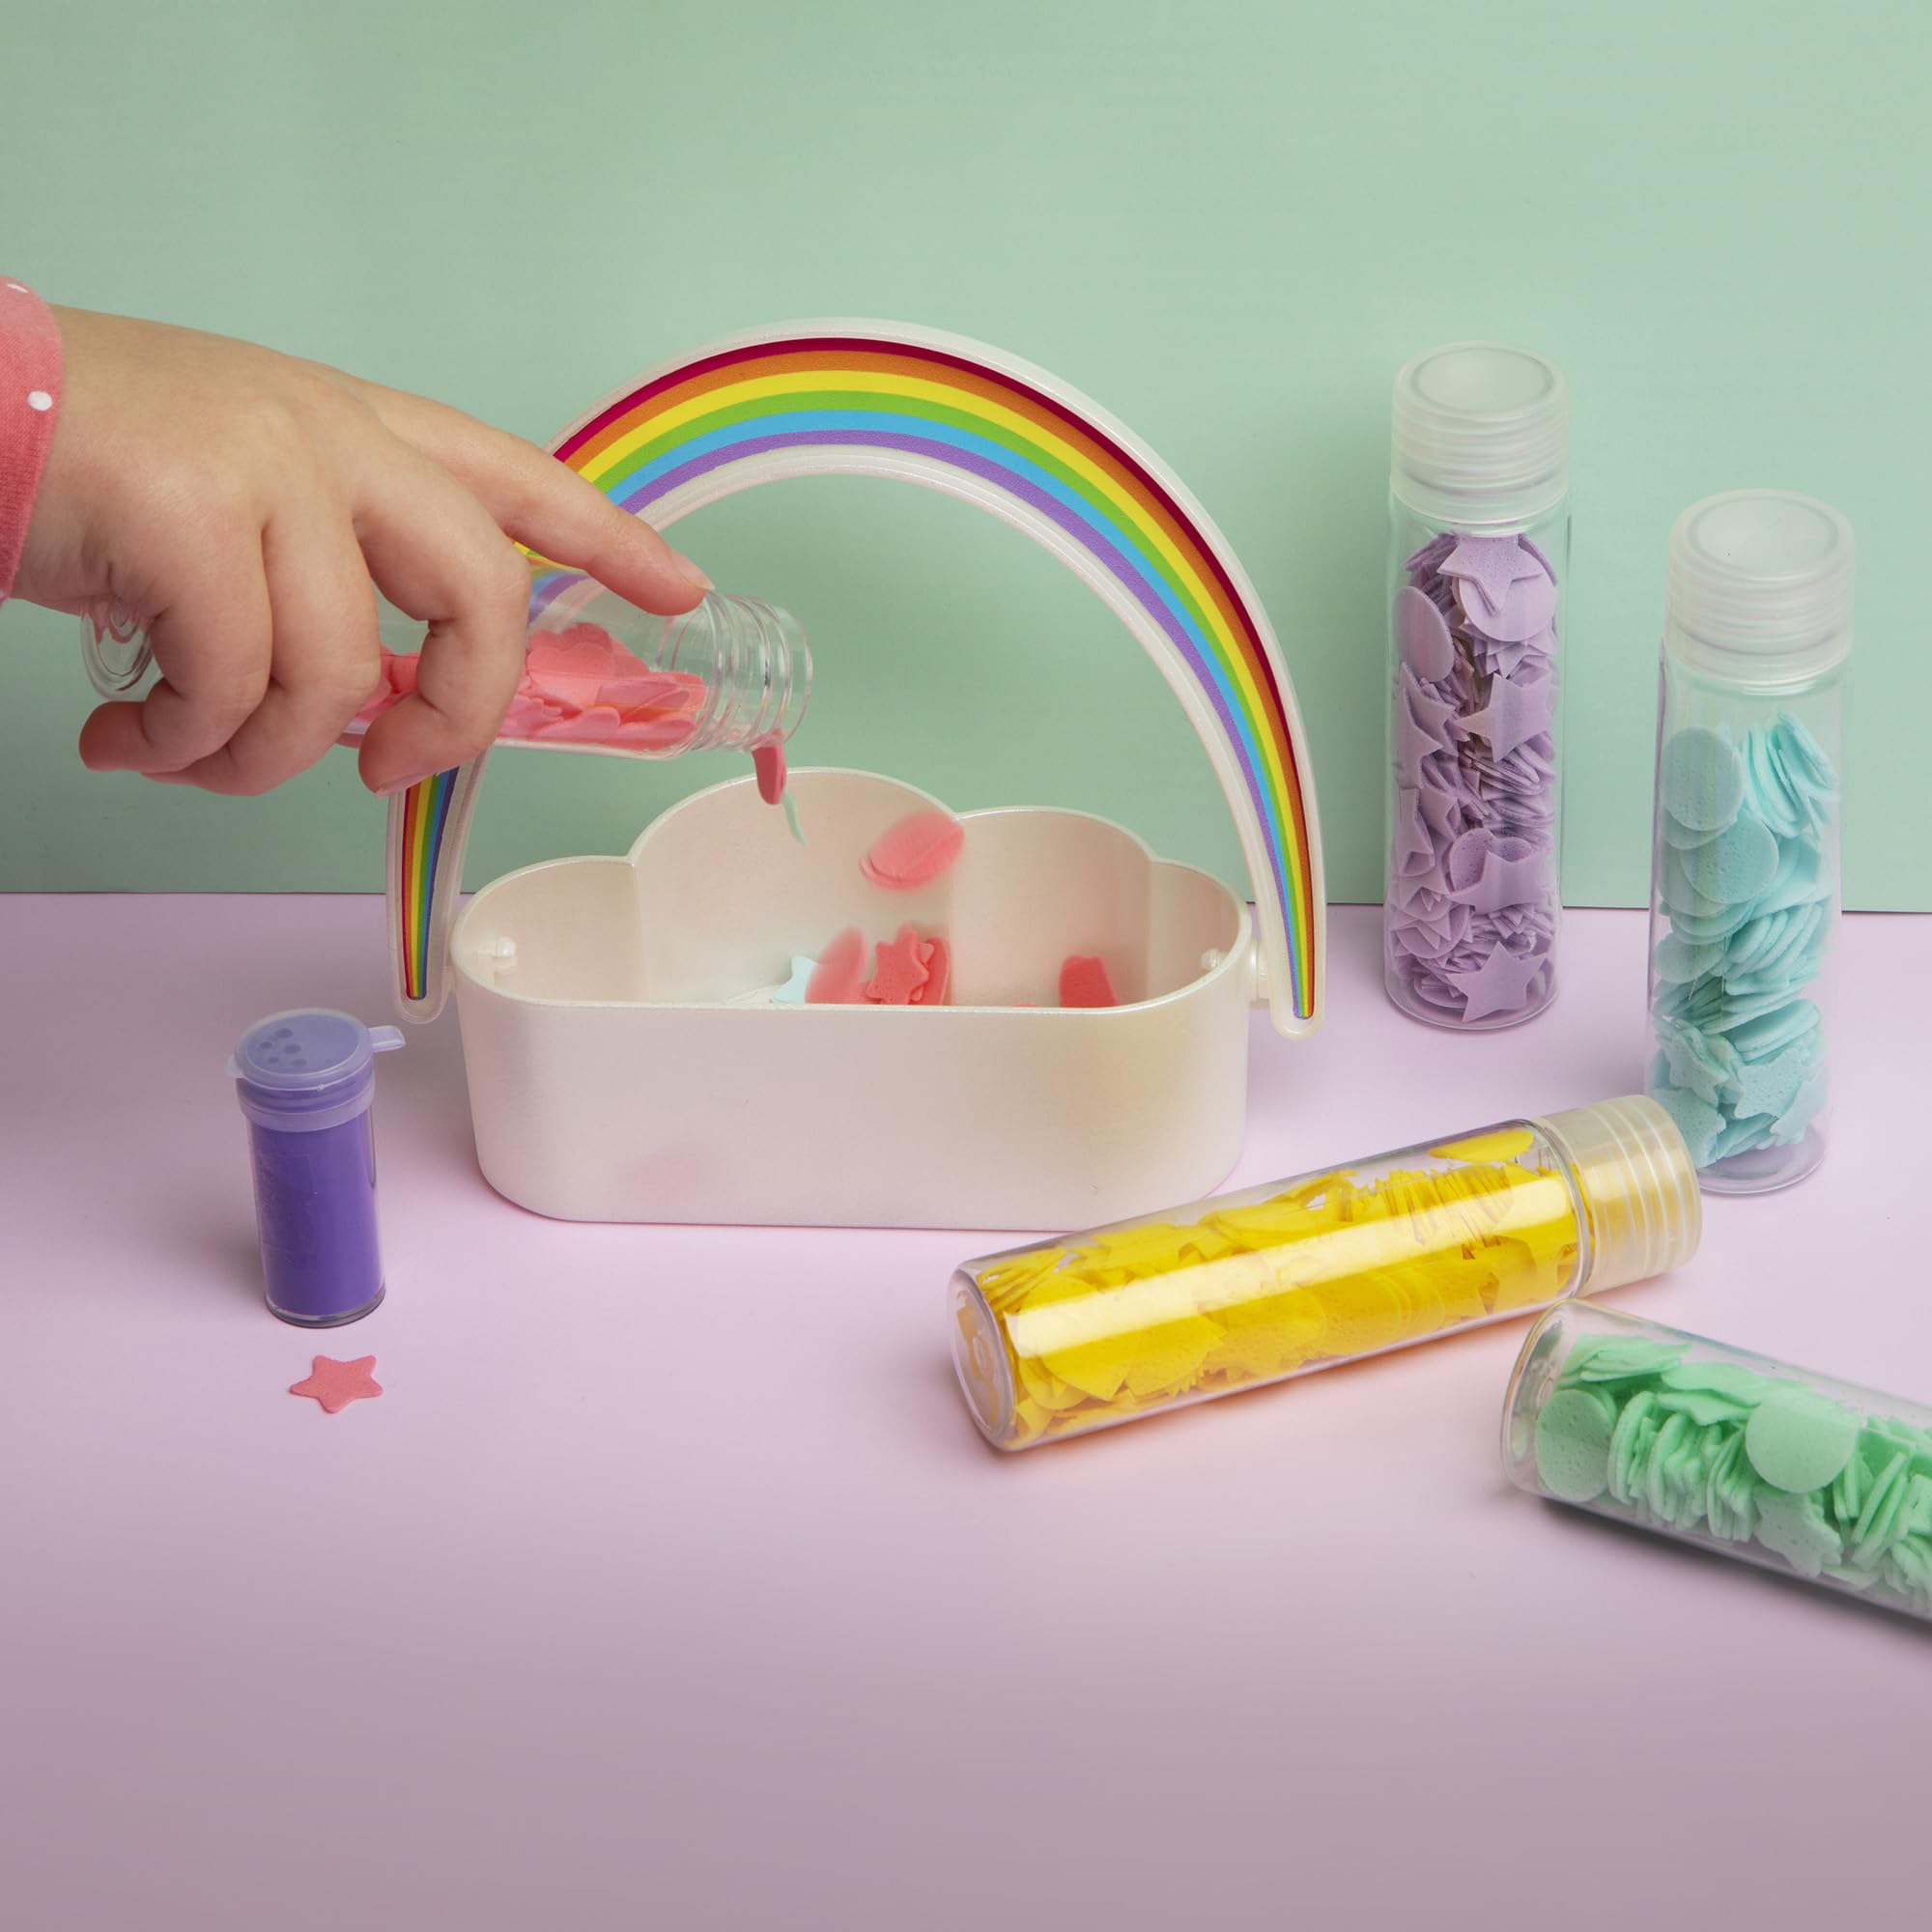 Craft-tastic - Bath Bubble Potions Toy - DIY Bath Tub Water Table Craft - Make Magic Potions and Bubbles in The Bath - for Kids Ages 4 and Up with Help